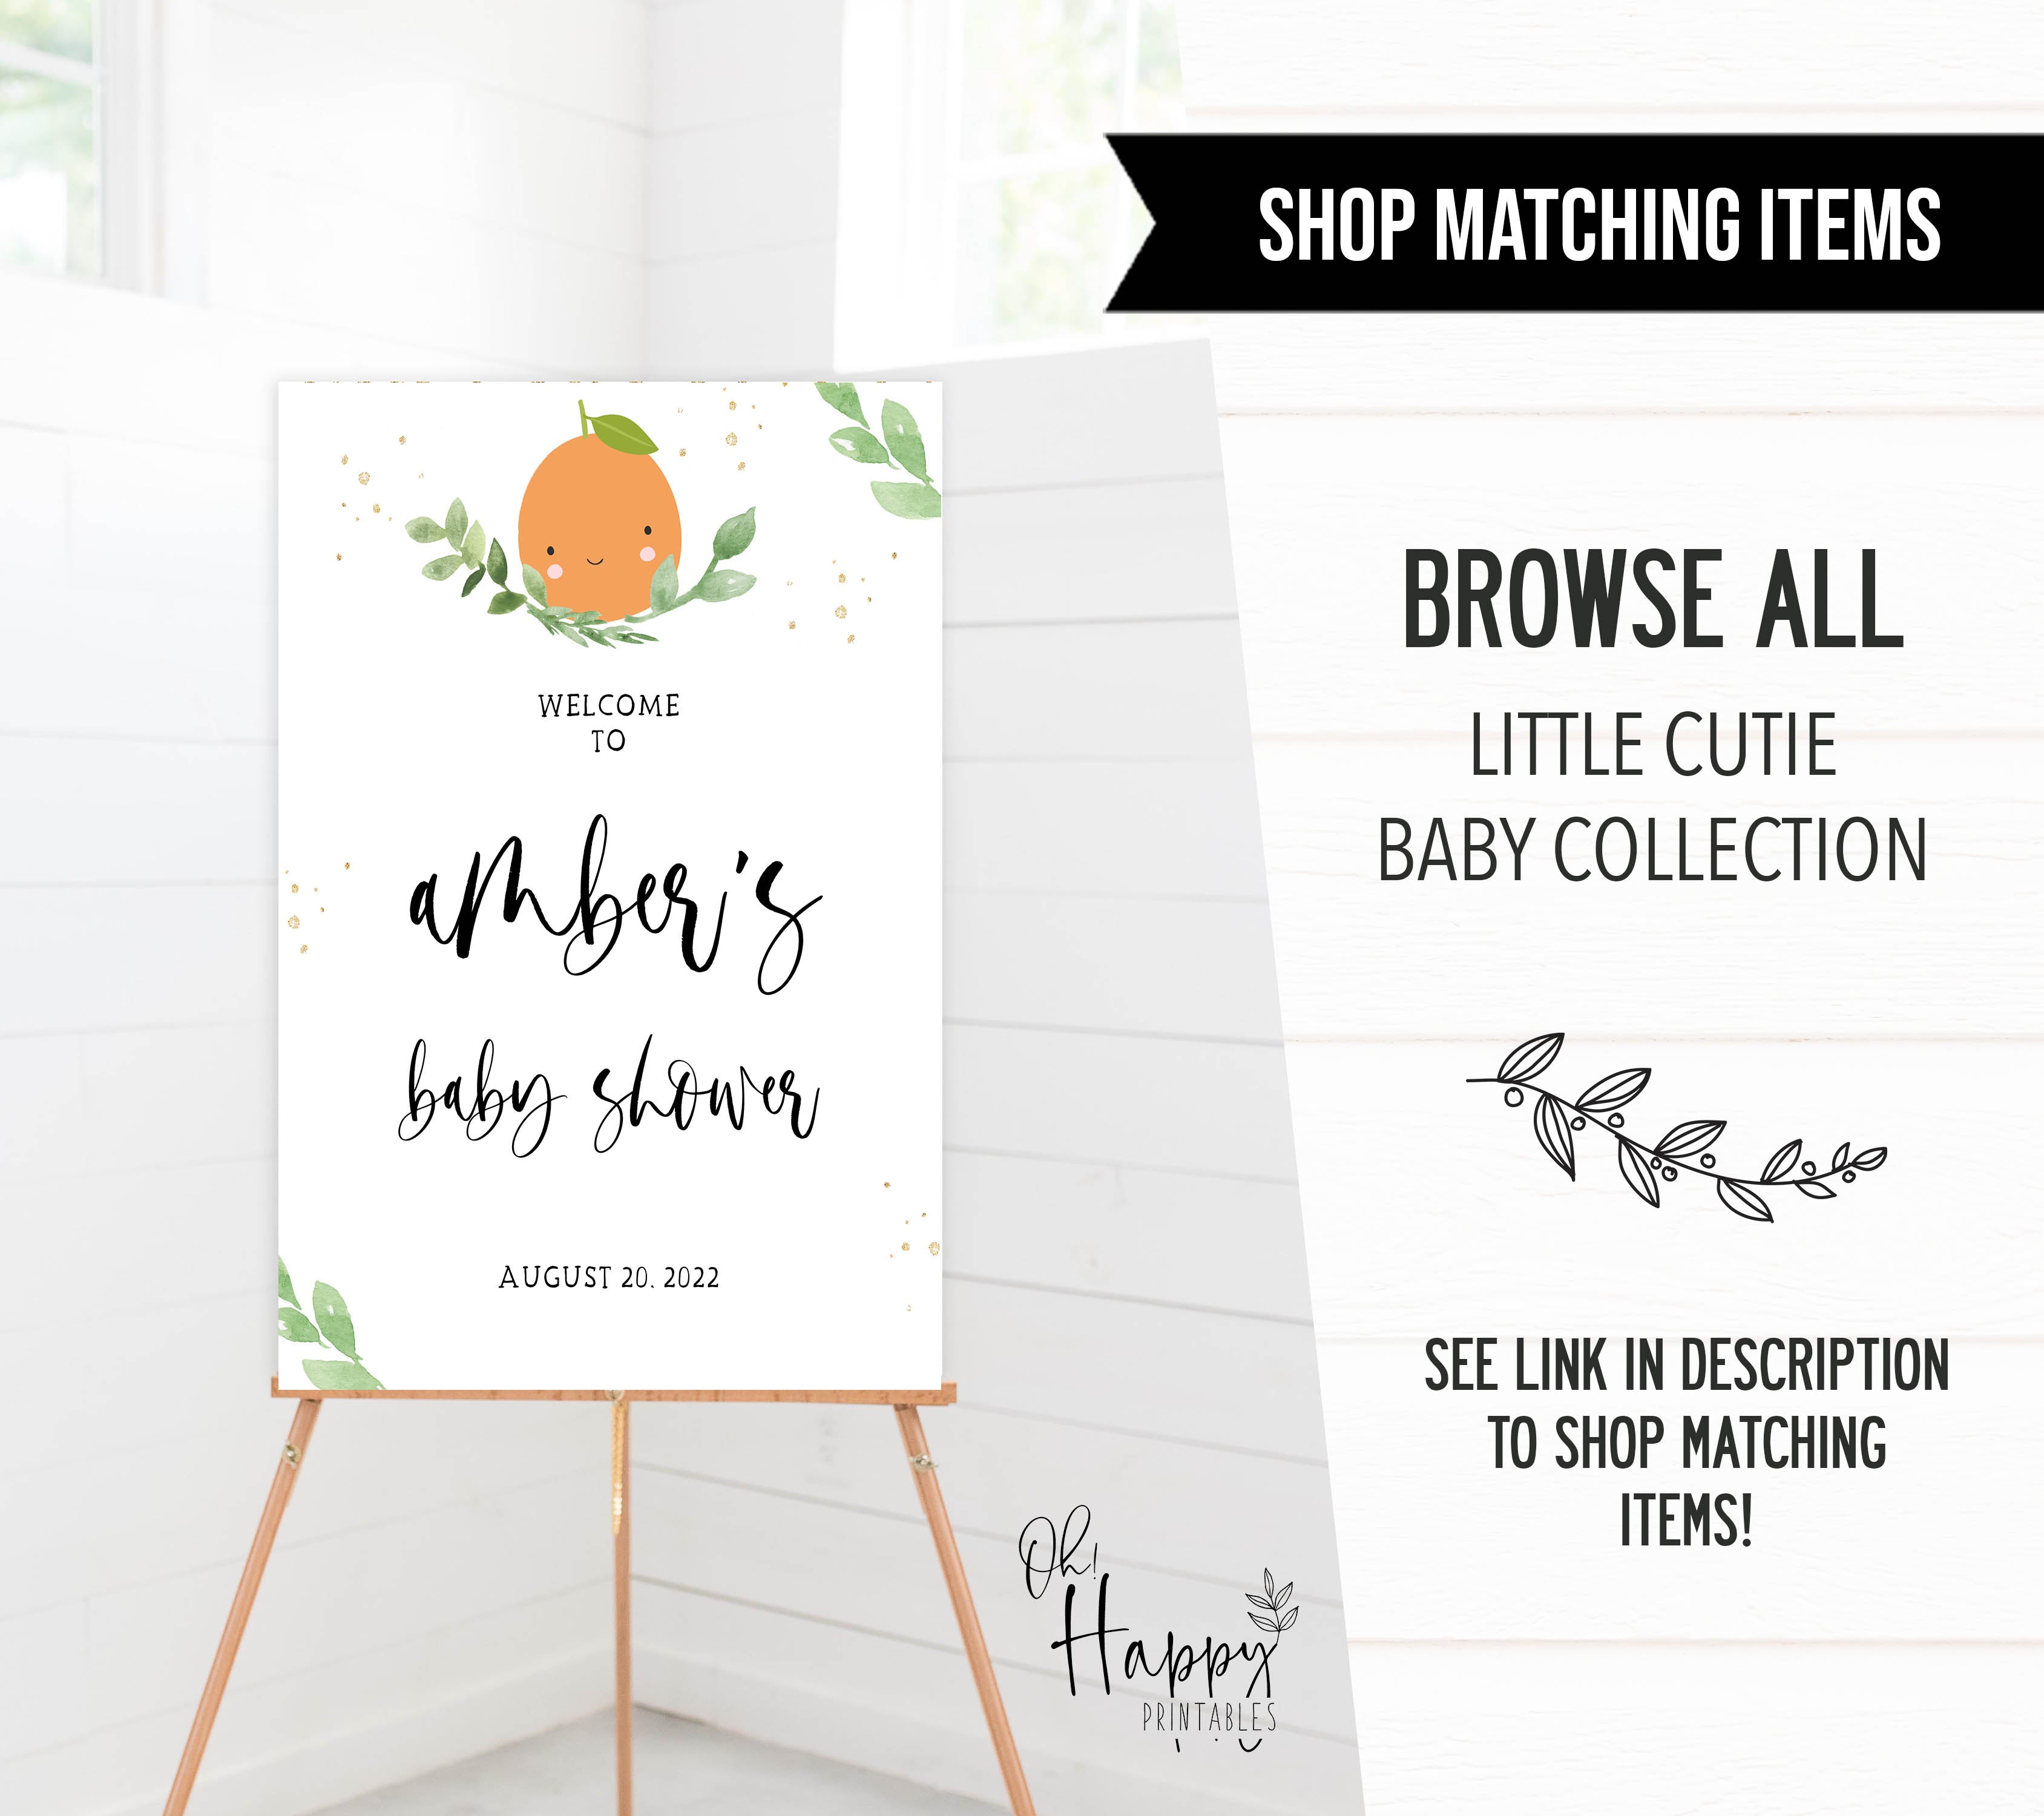 who is my mama baby shower games, Printable baby shower games, little cutie baby games, baby shower games, fun baby shower ideas, top baby shower ideas, little cutie baby shower, baby shower games, fun little cutie baby shower ideas